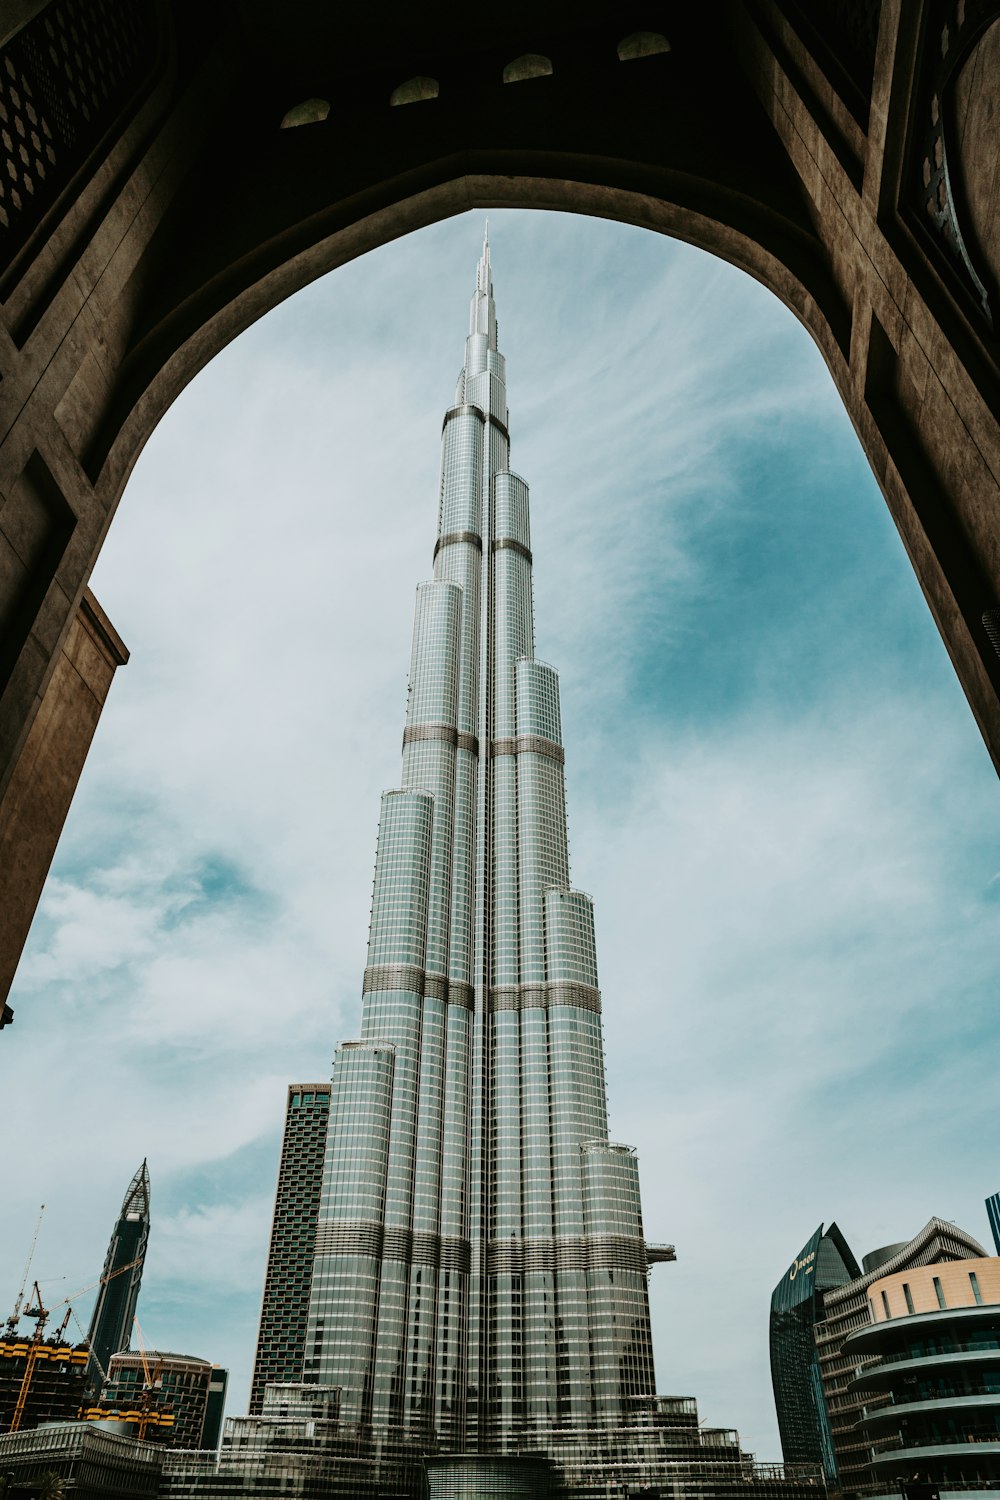 a tall building with a curved top with Burj Khalifa in the background